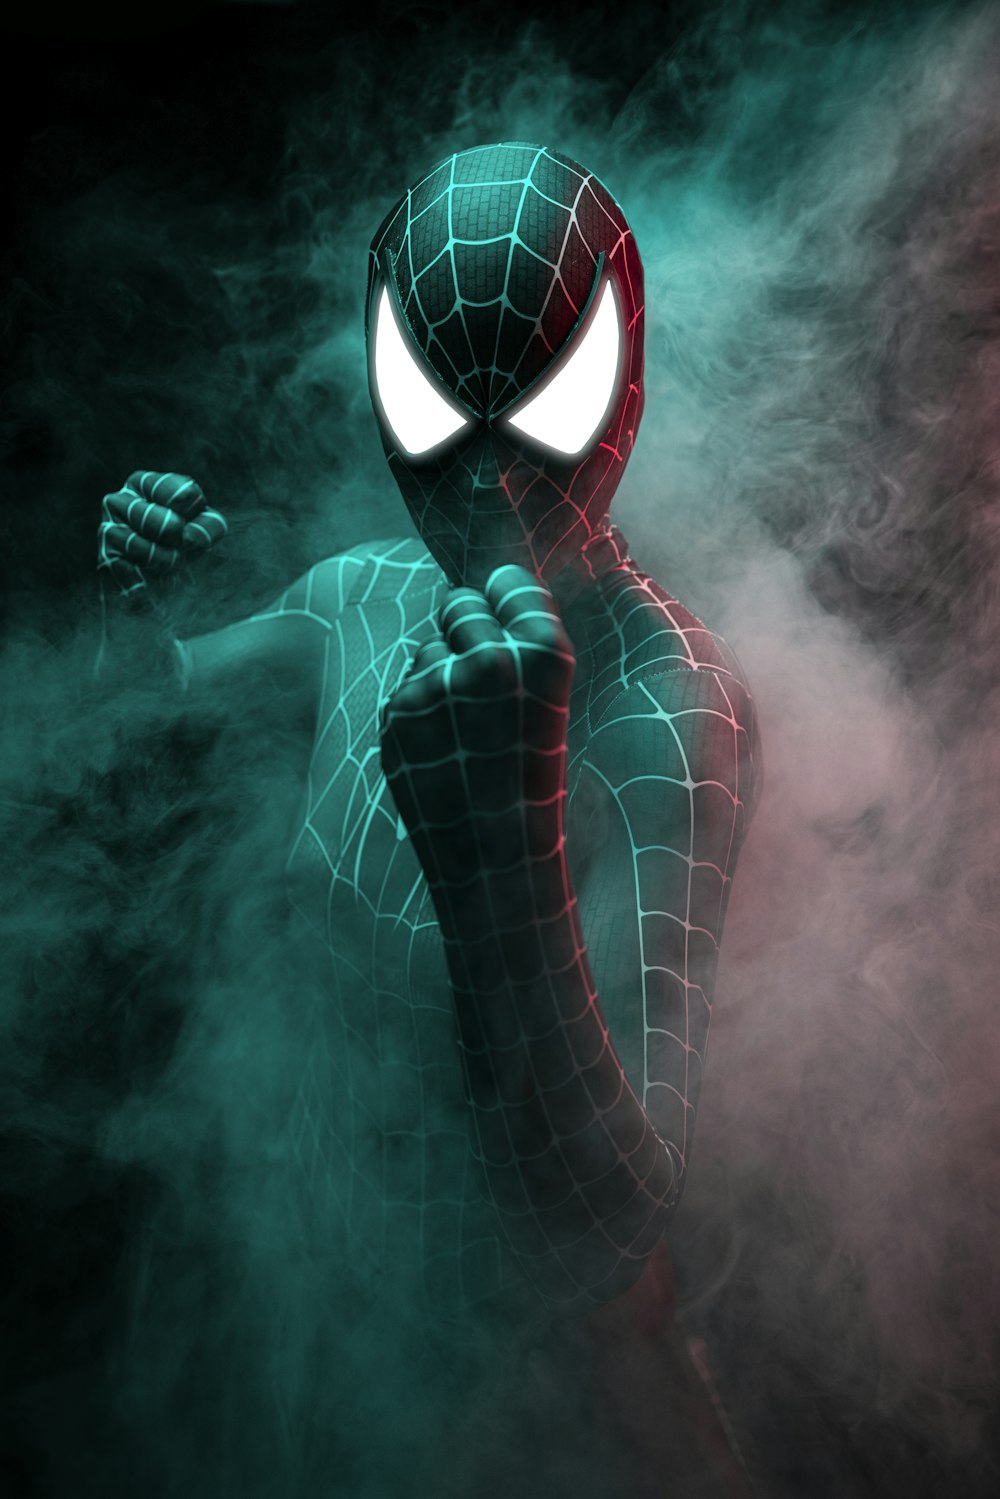 a spider - man in a suit with glowing eyes